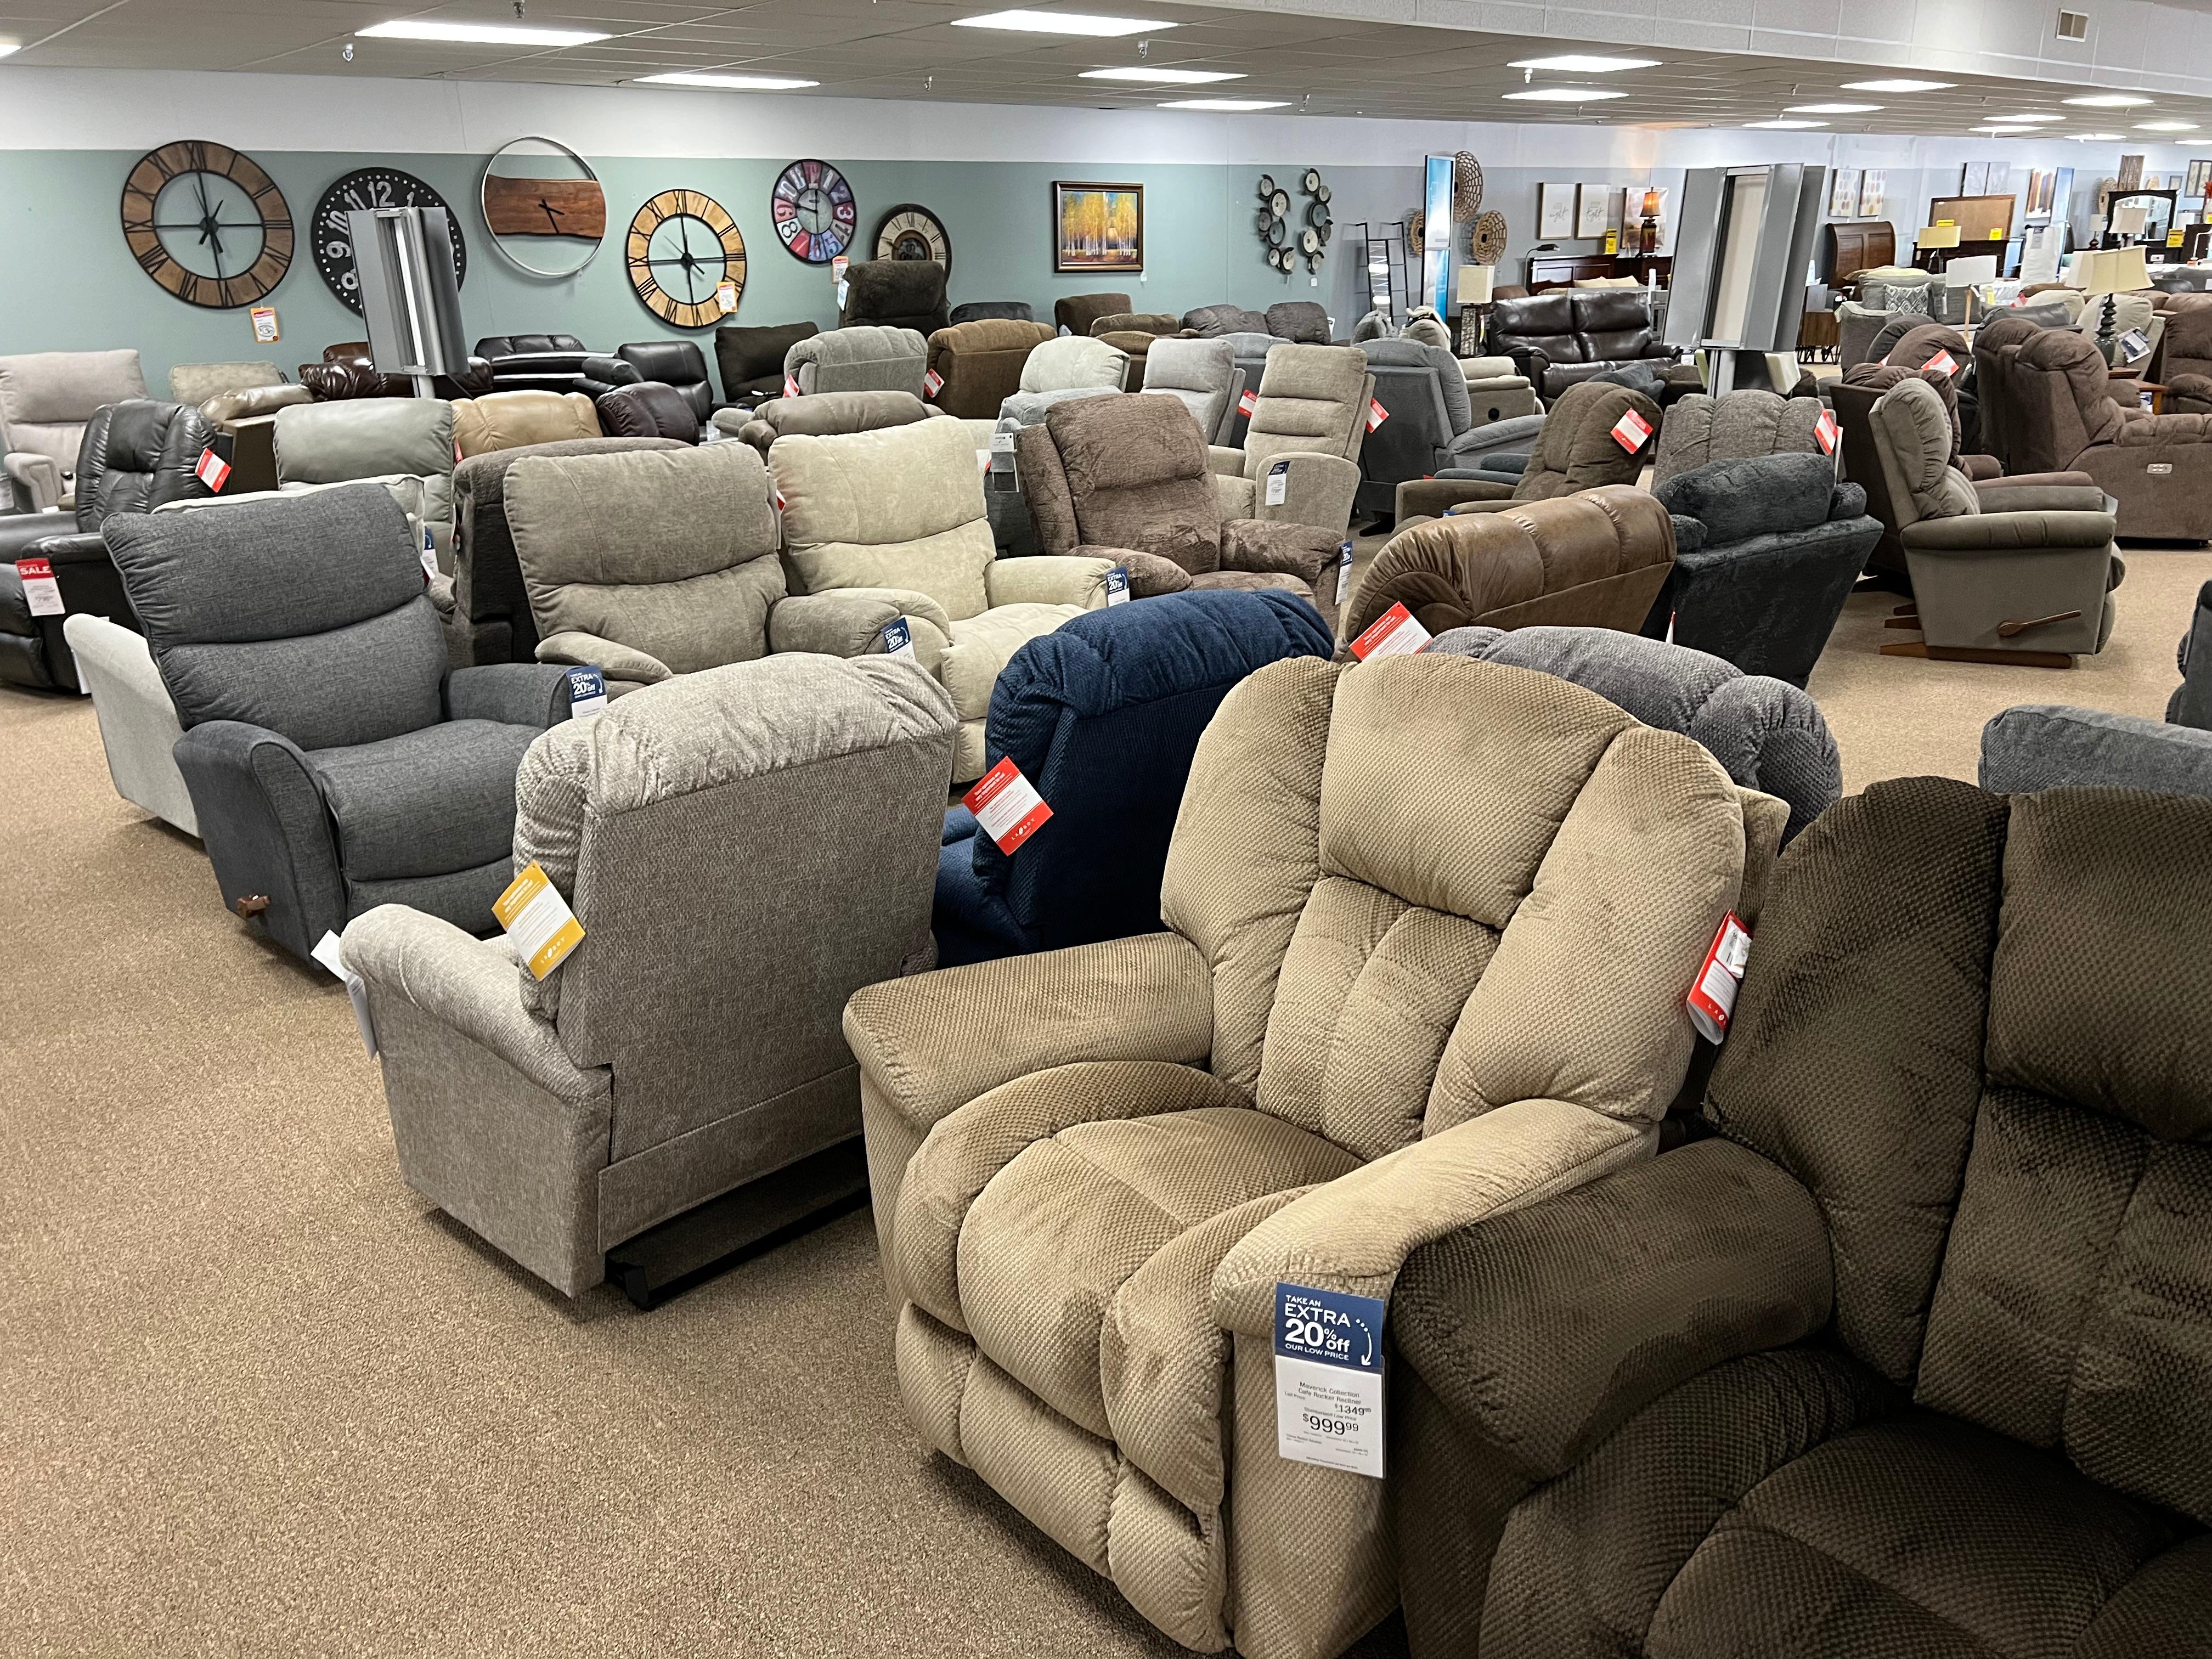 Pearl River LA Discount Furniture Outlet Store